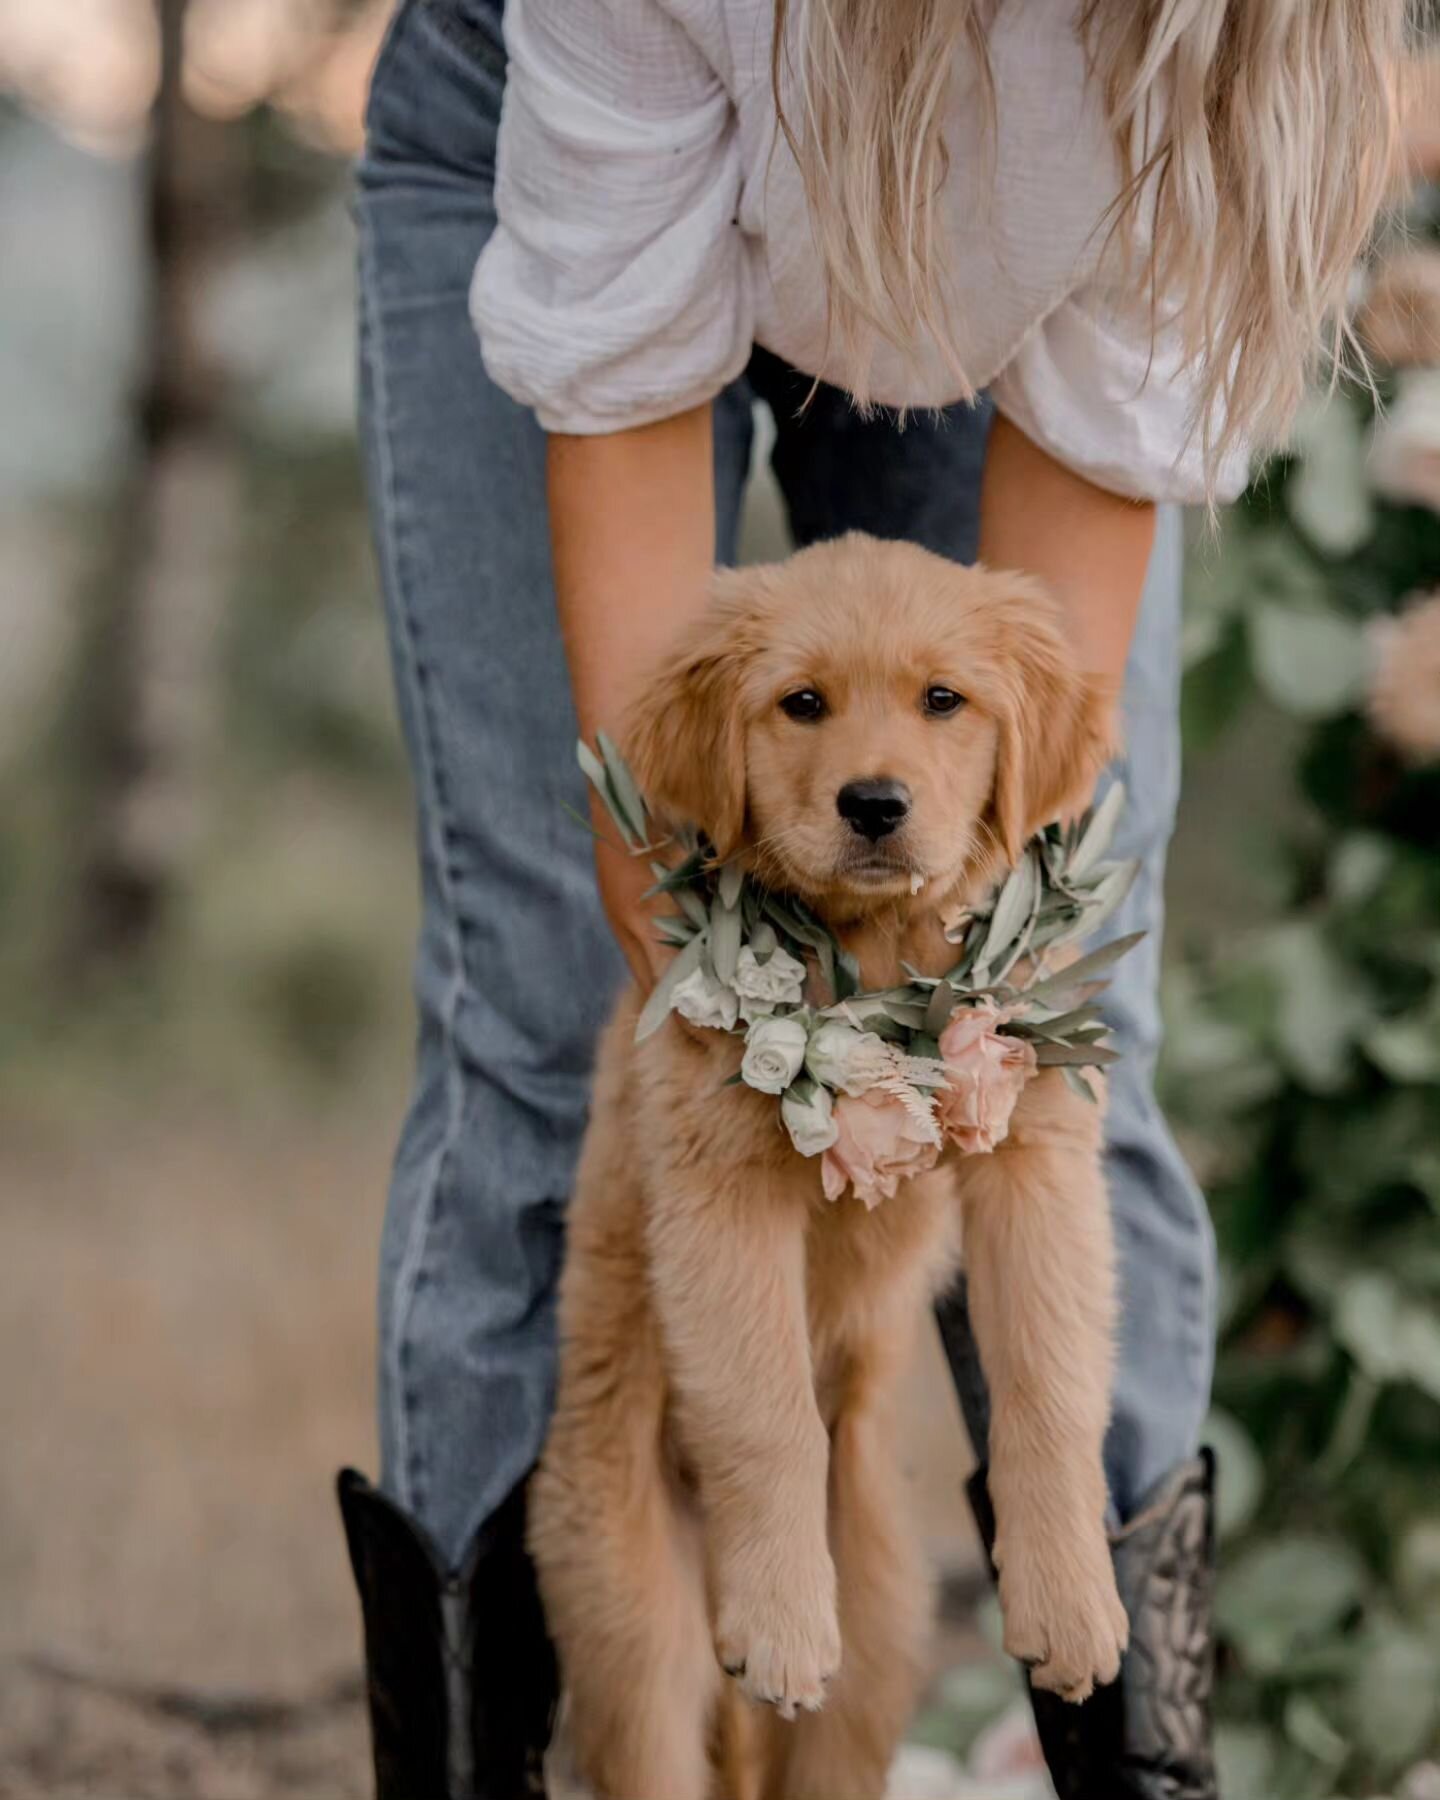 In honor of Happy National Puppy day, here are some photos of the sweetest golden boy when he was just a little peanut!! 🌼💛

Still think of this shoot often! It was the PERFECT evening and Lavina and Bentley were a joy to spend time with. 

Photogr